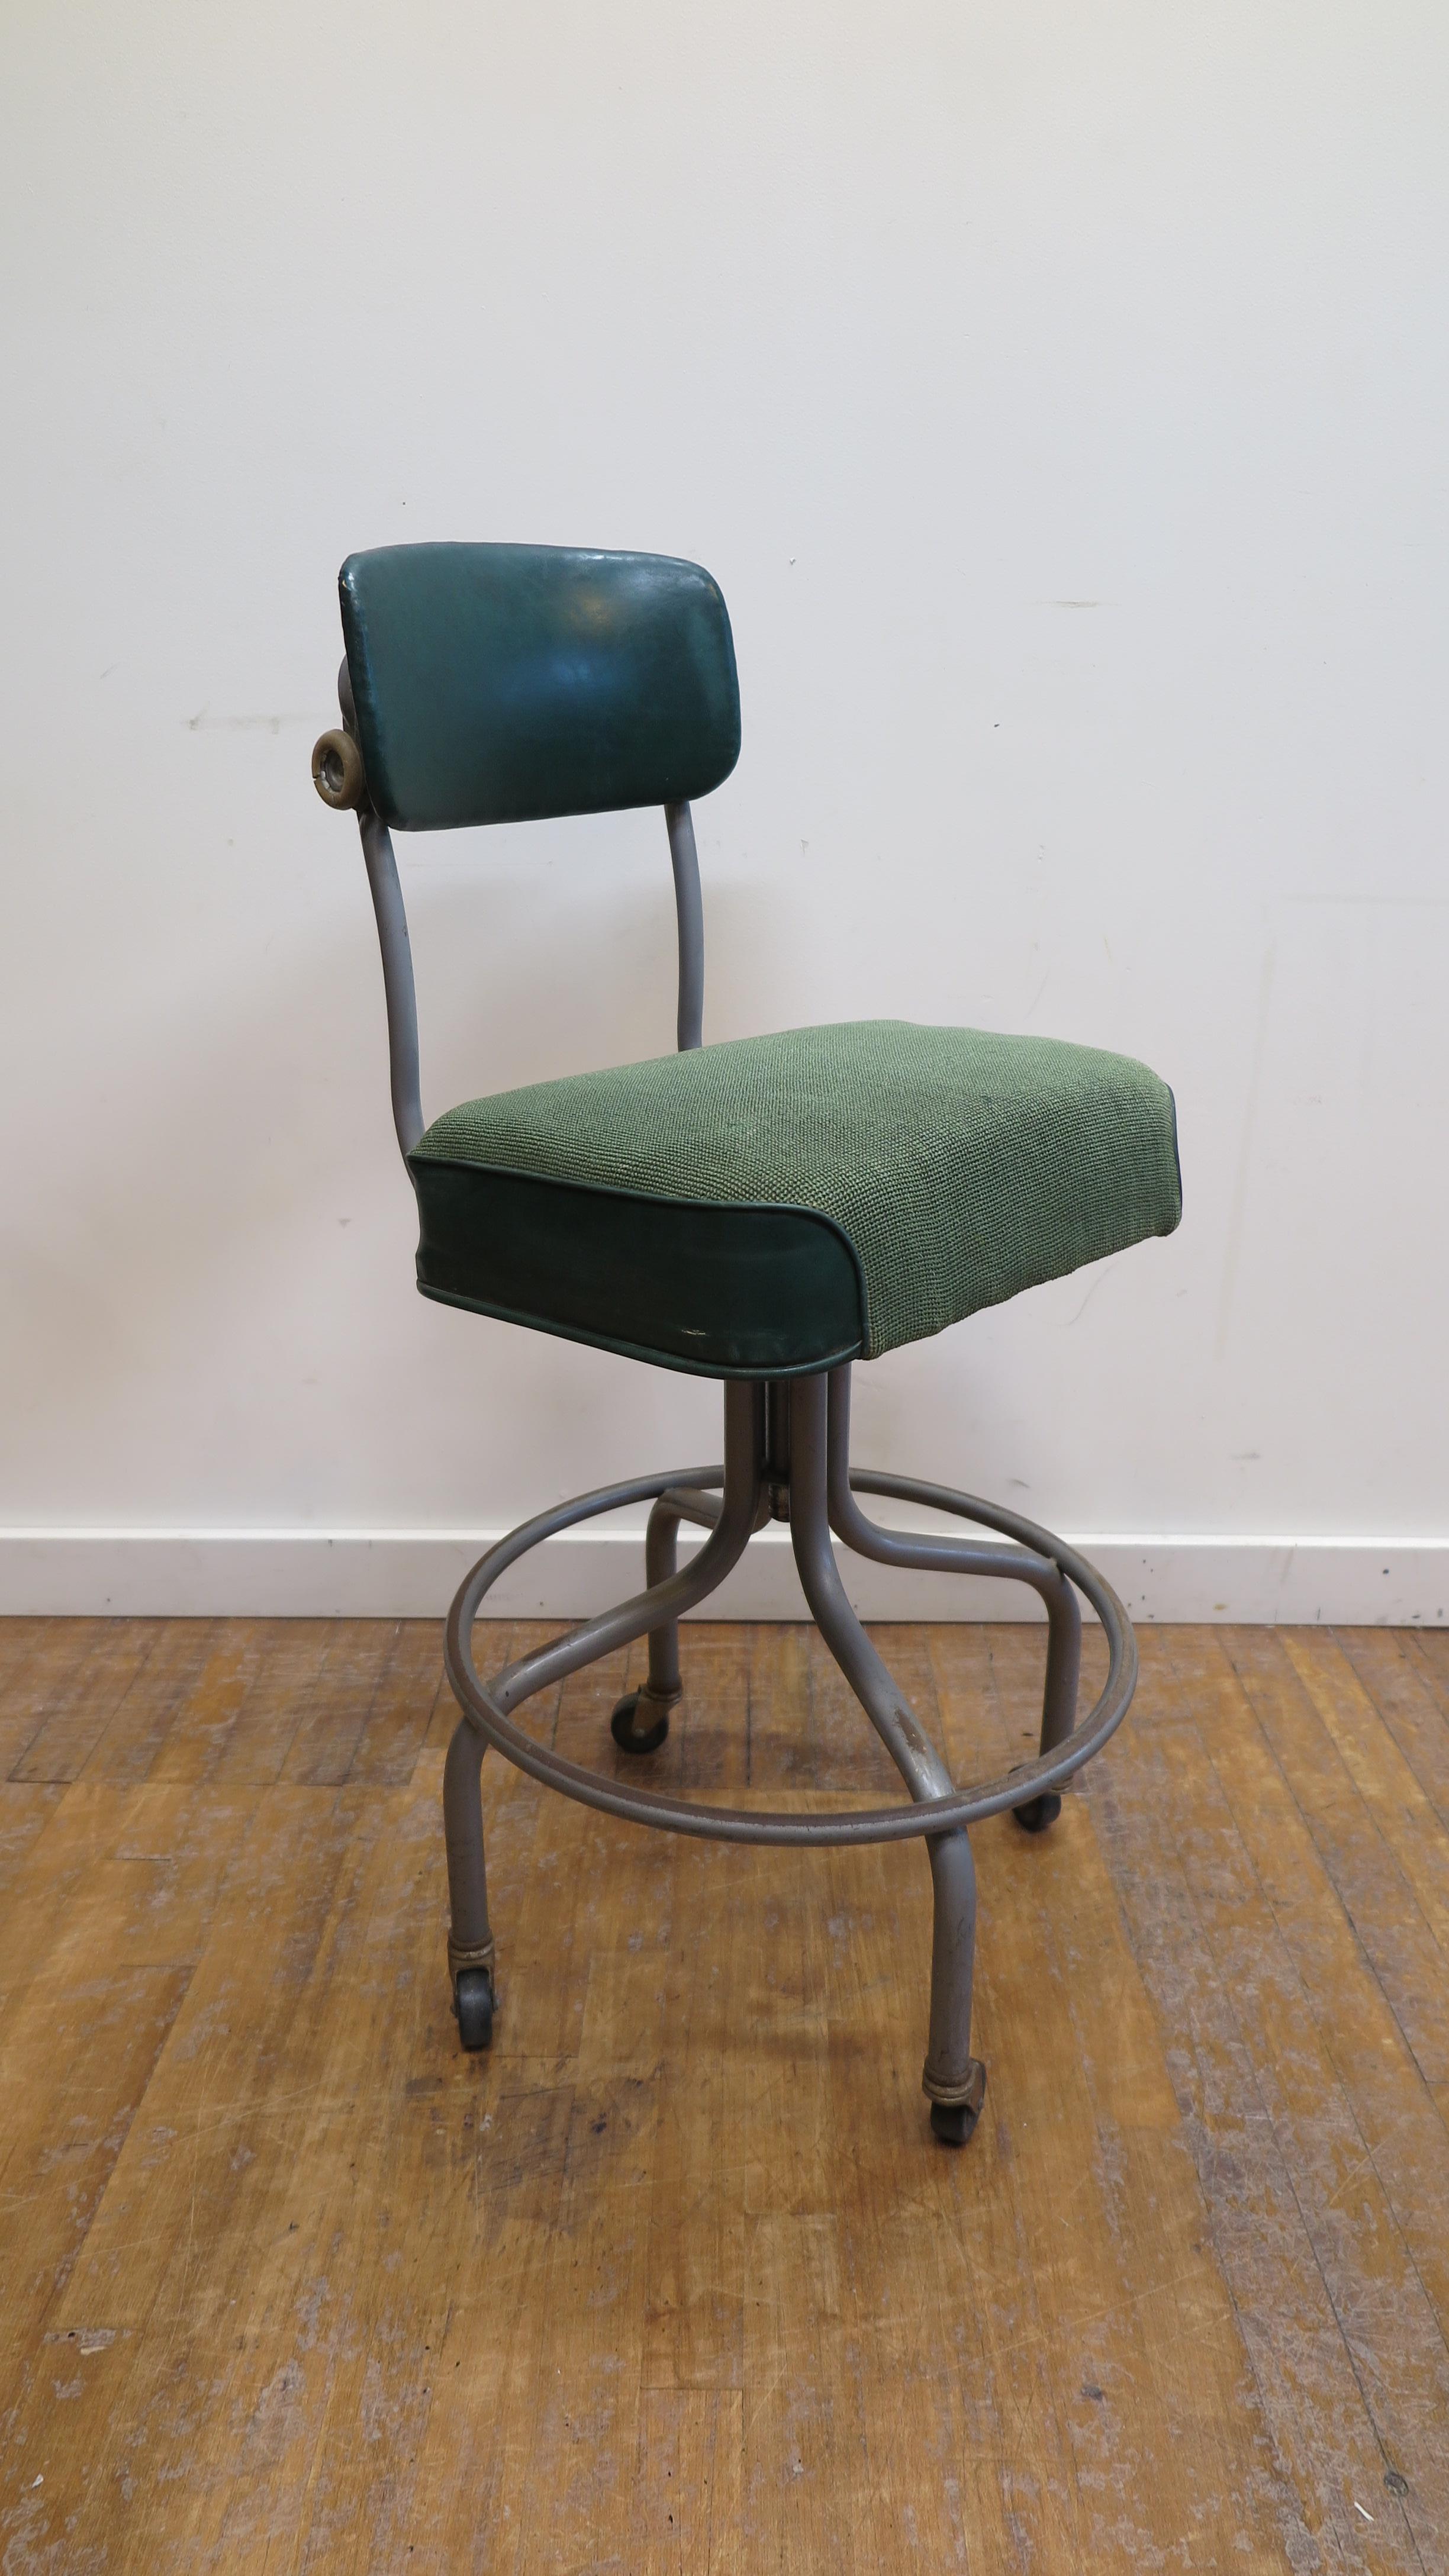 Steelcase drafting rolling chair. Industrial Drafting Chair by Steelcase in good condition all original. Mid Century Modern Industrial Rolling chair. This chair dates to 1968 underside tag. Age appropriate ware please see pictures. Works perfectly,